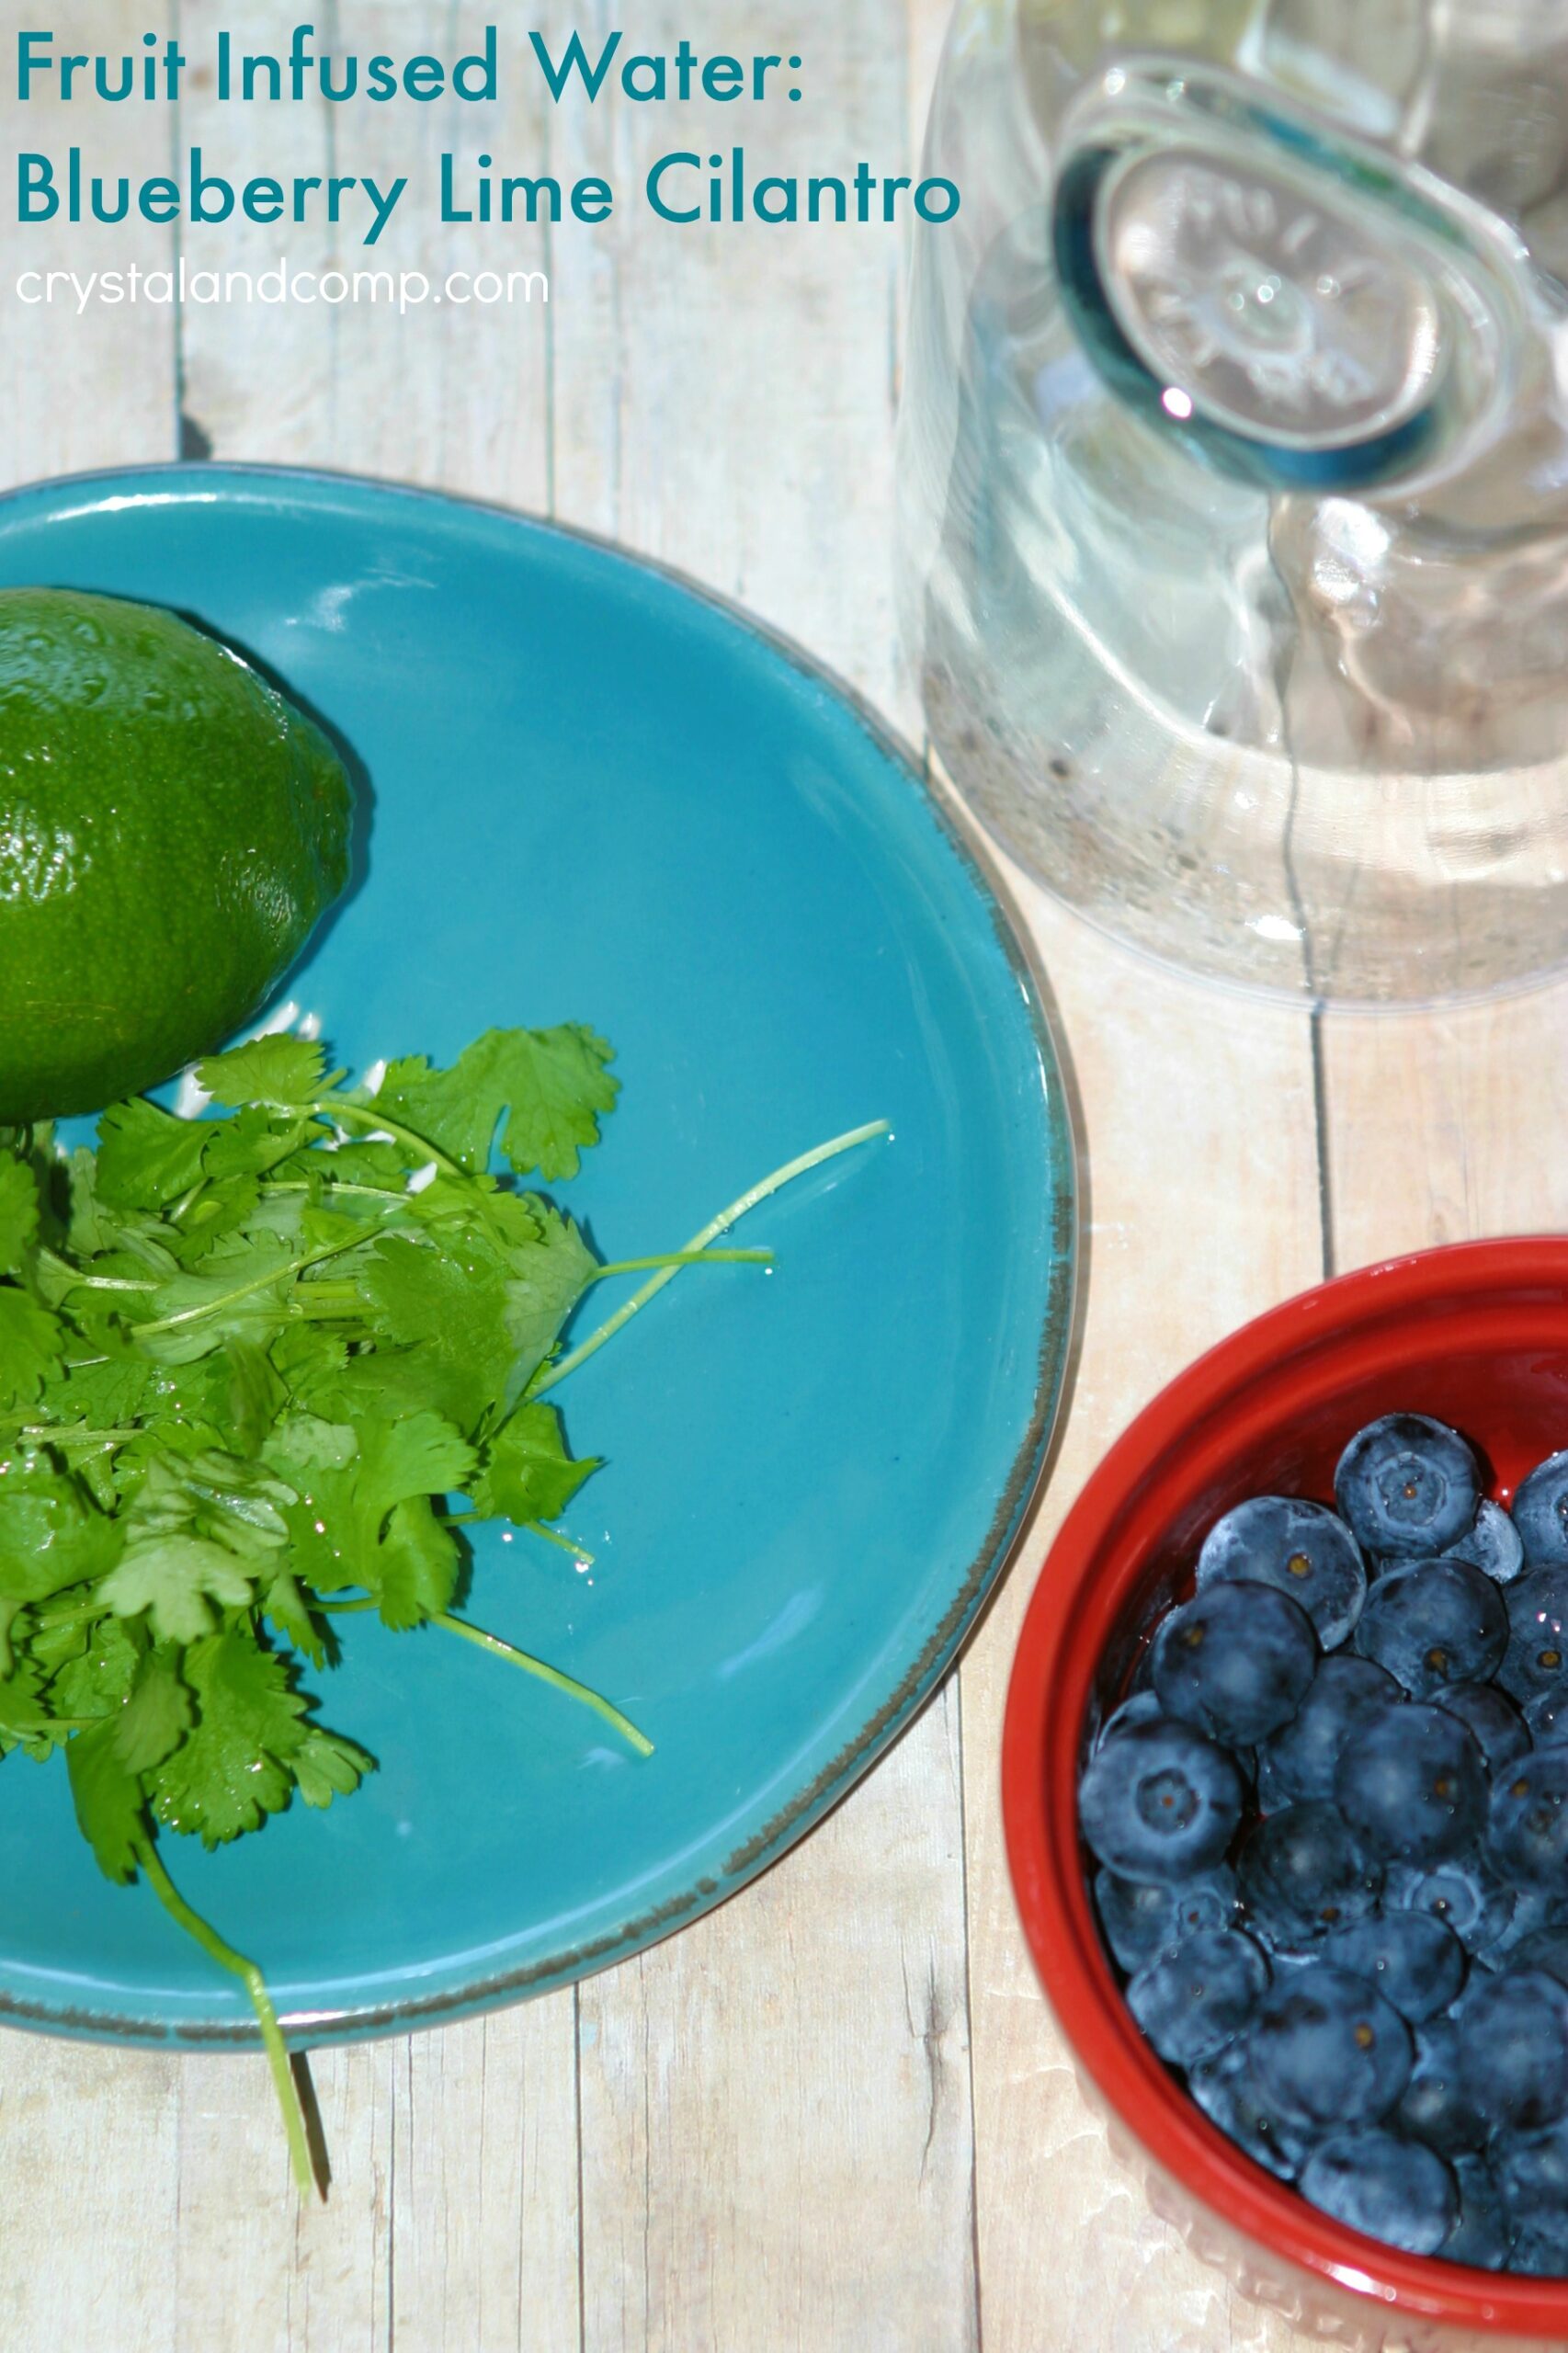 https://cookcleanrepeat.com/wp-content/uploads/2020/07/Fruit-Infused-Water-Blueberry-Lime-Cilantro--scaled.jpg